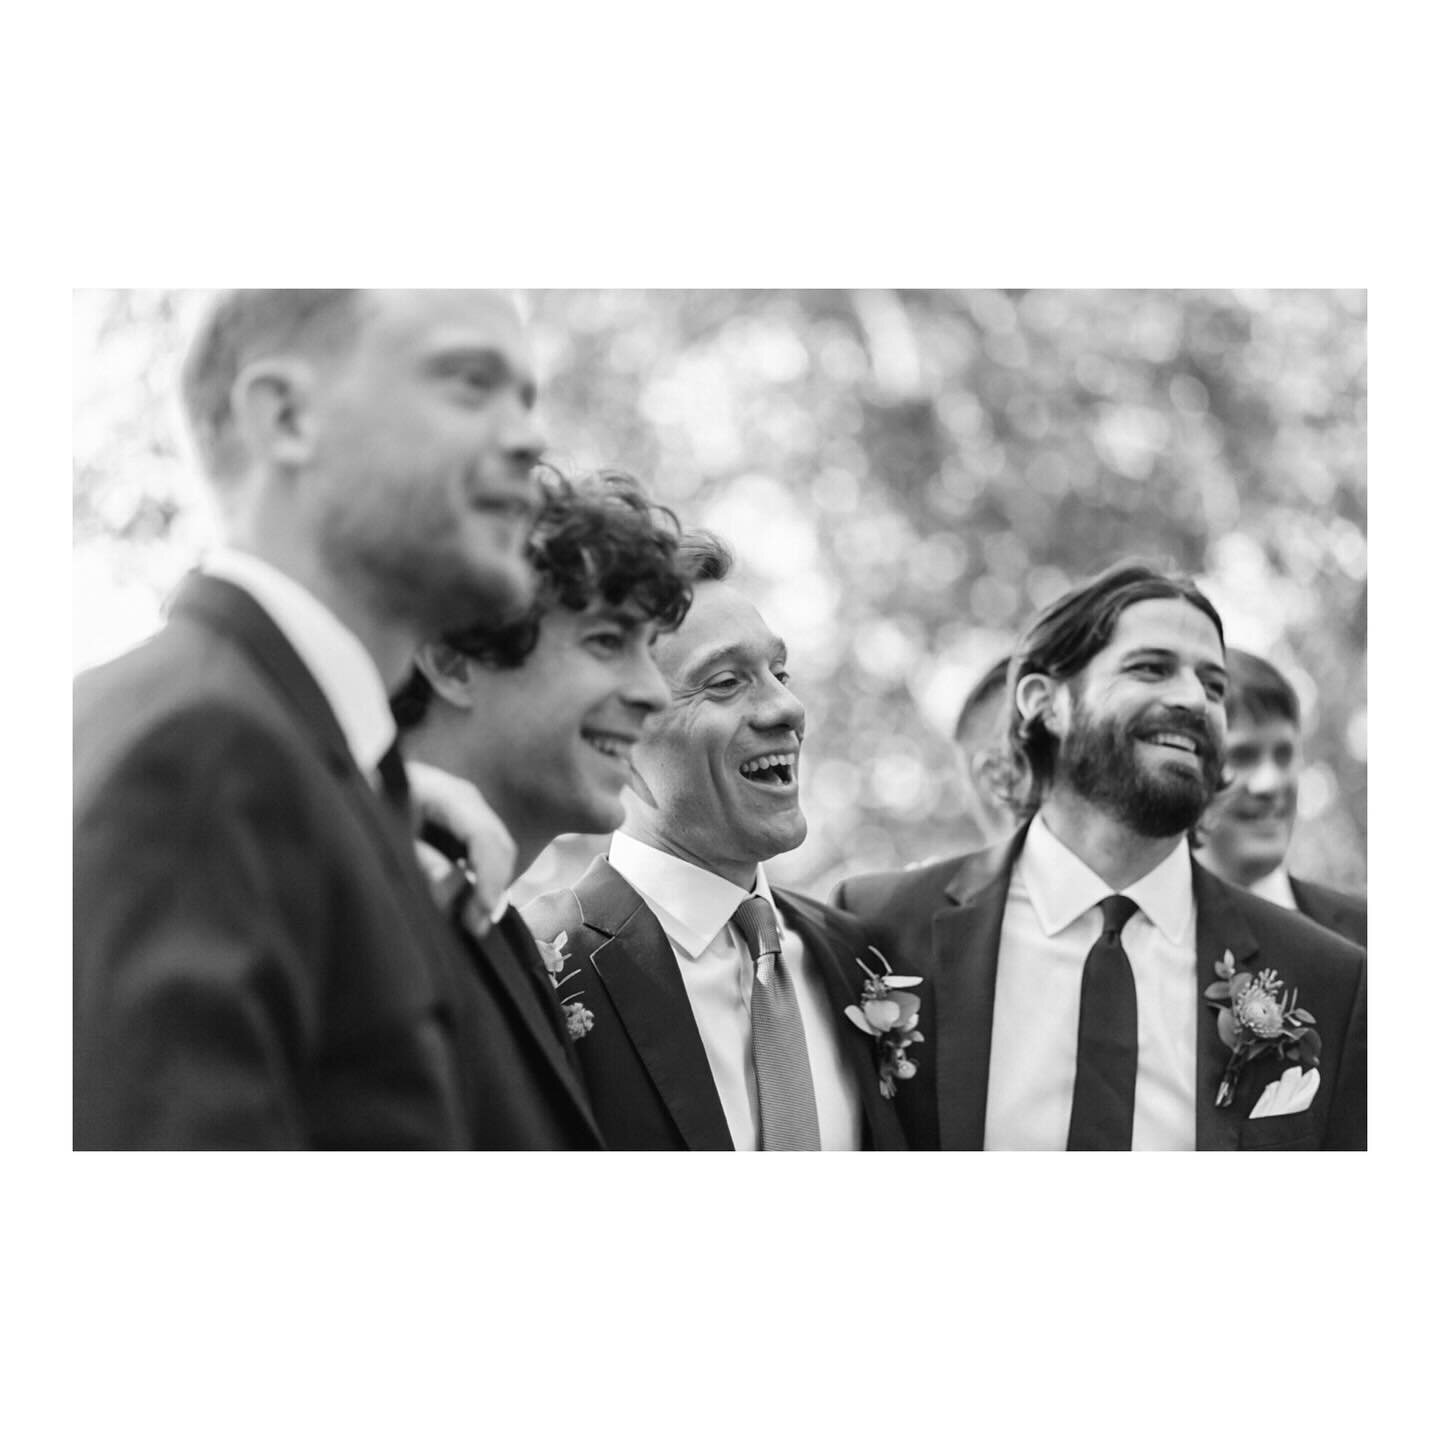 What is a wedding? A day filled with unadulterated laughter.